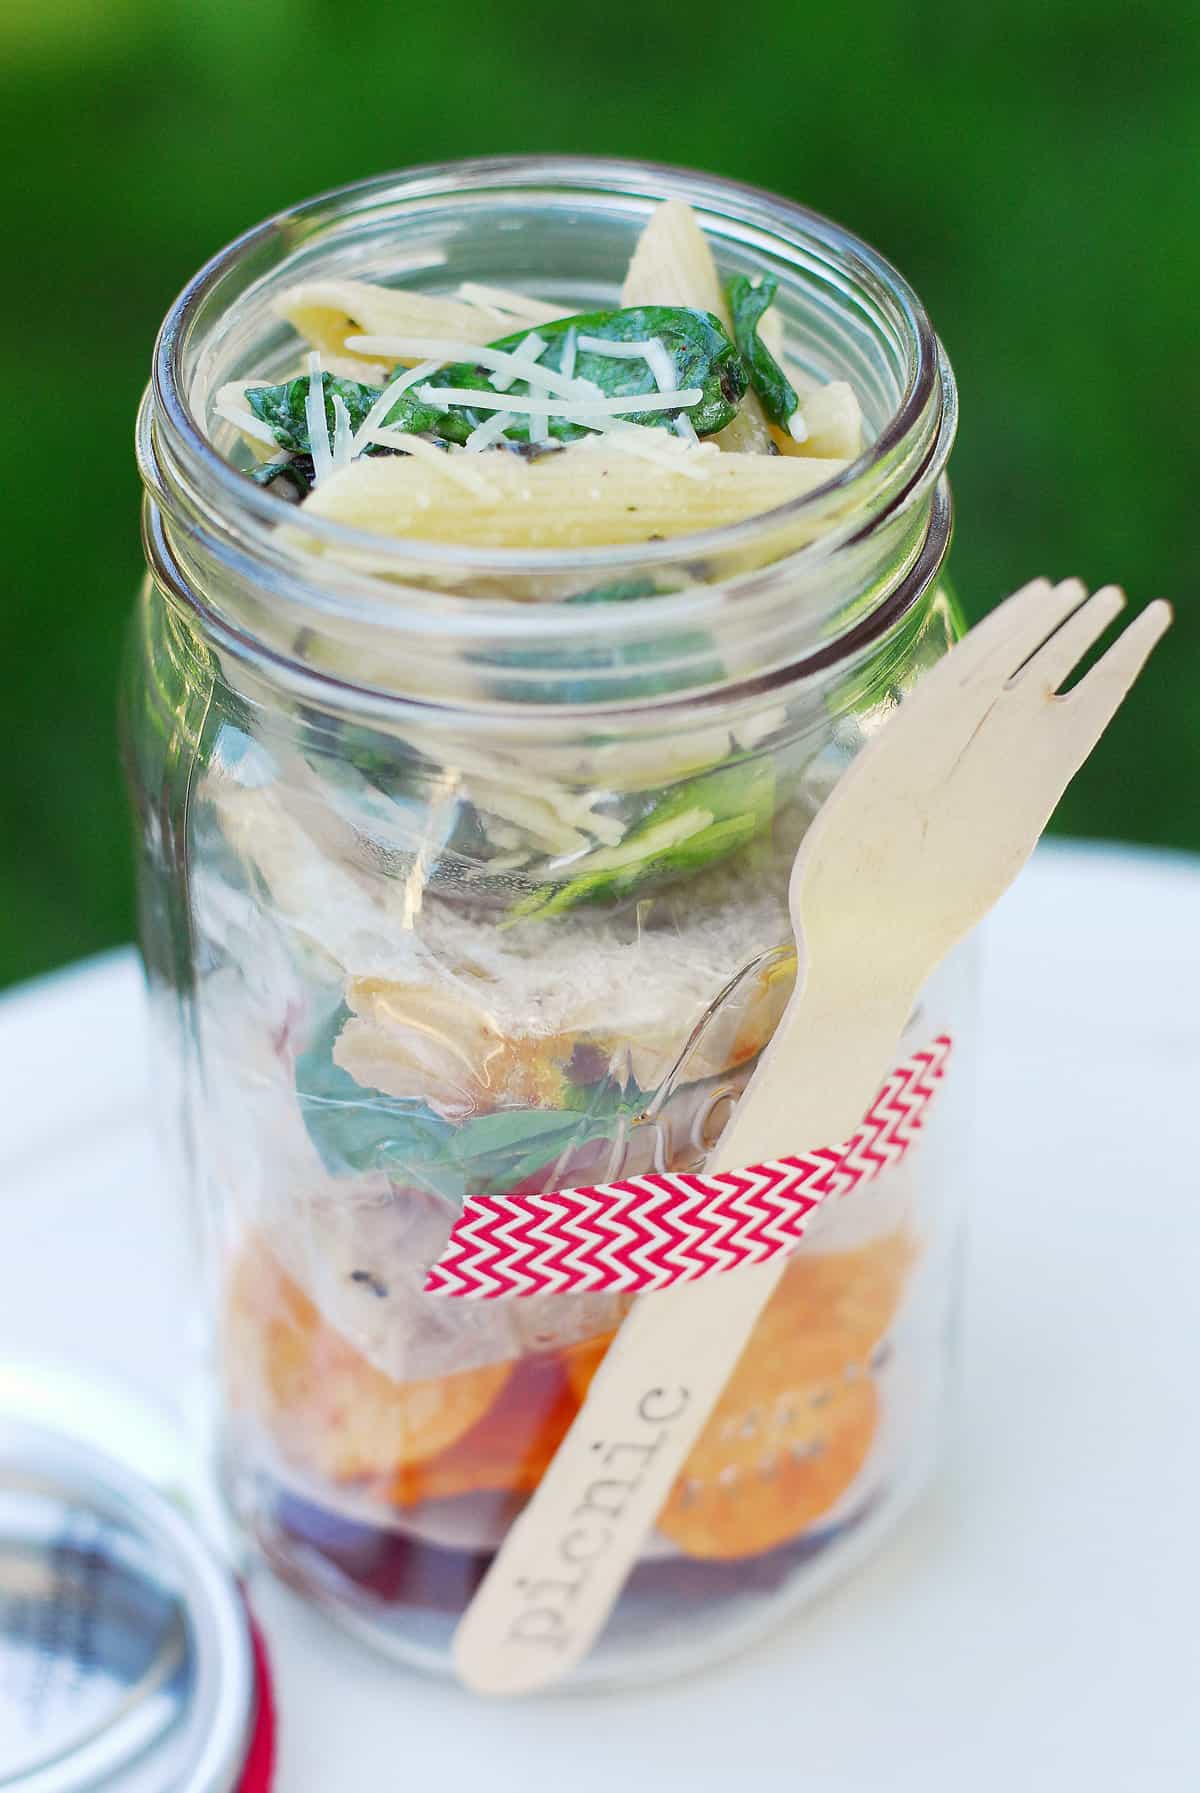 Picnic in a jar topped with salad.